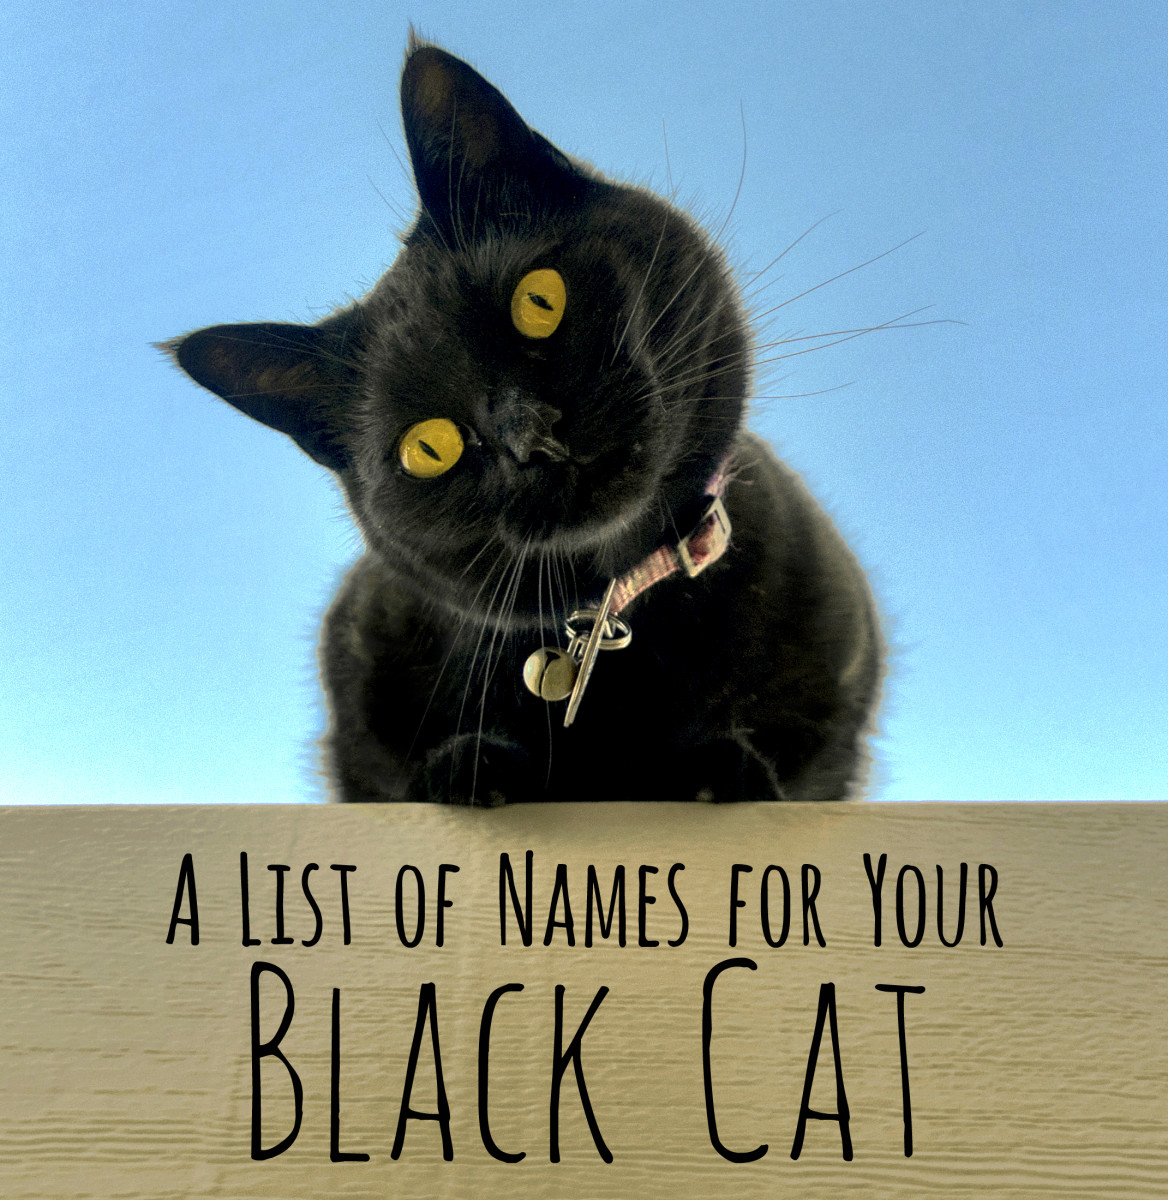 250+ Cool, Unique, and Creative Names for Your Black Cat